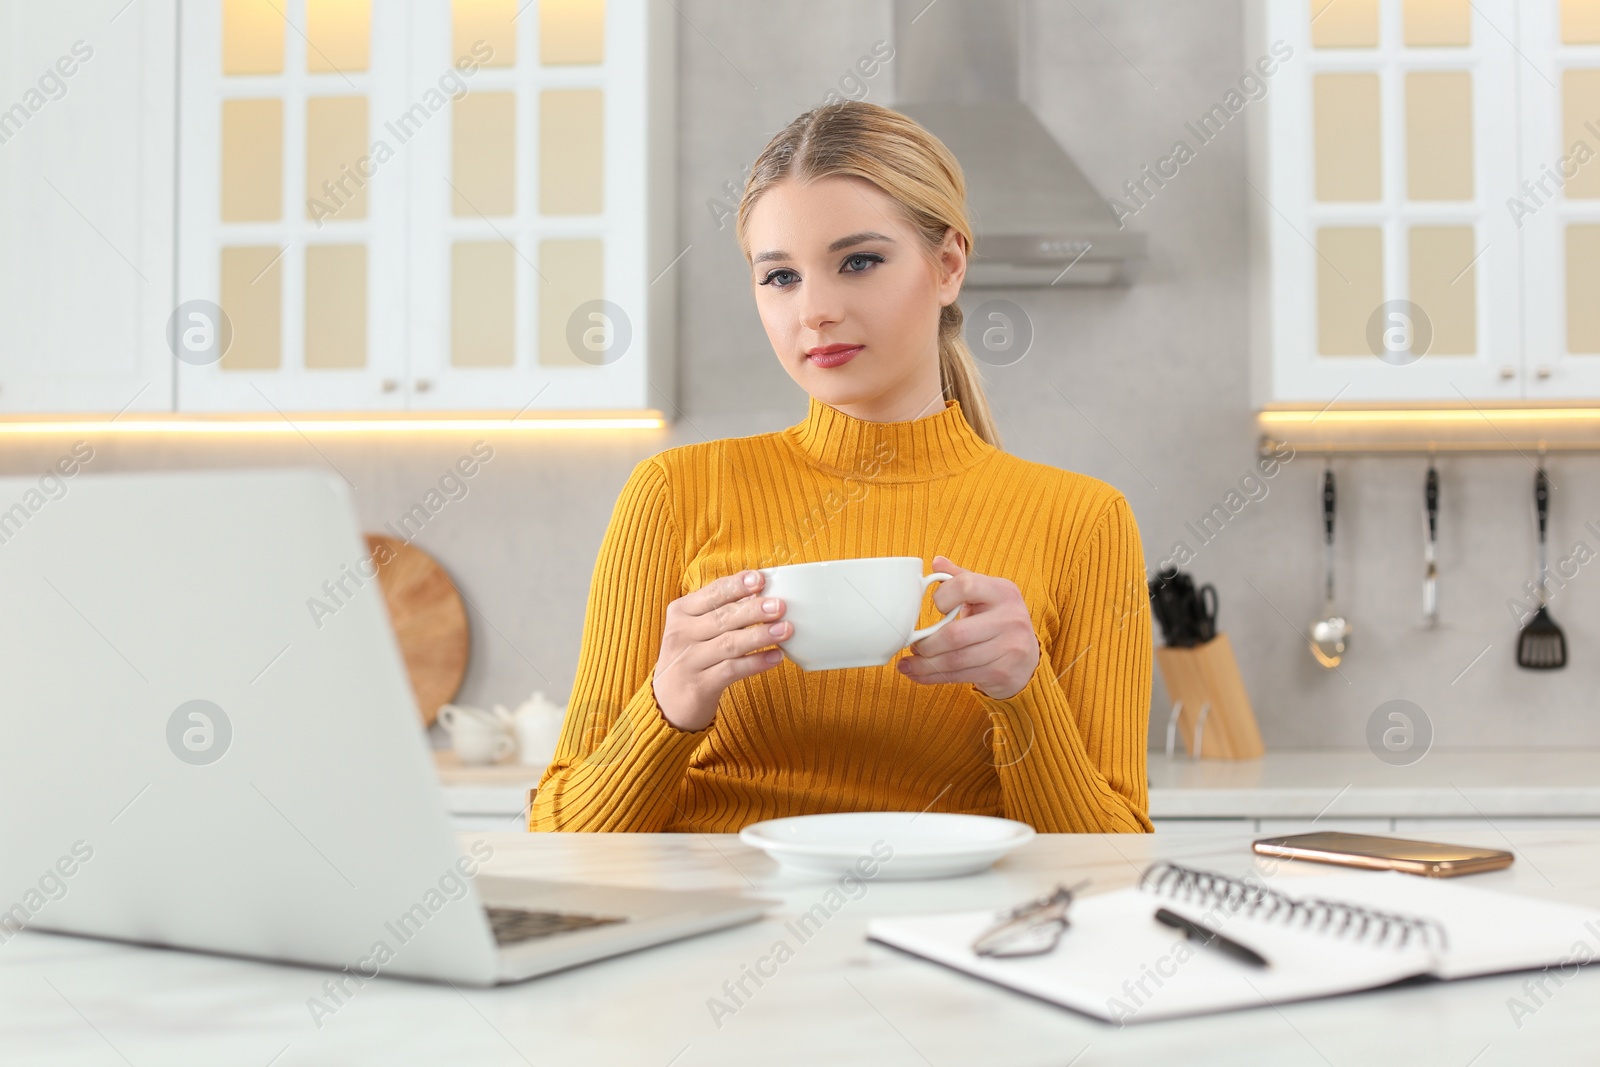 Photo of Home workplace. Woman with cup of hot drink looking at laptop at marble desk in kitchen